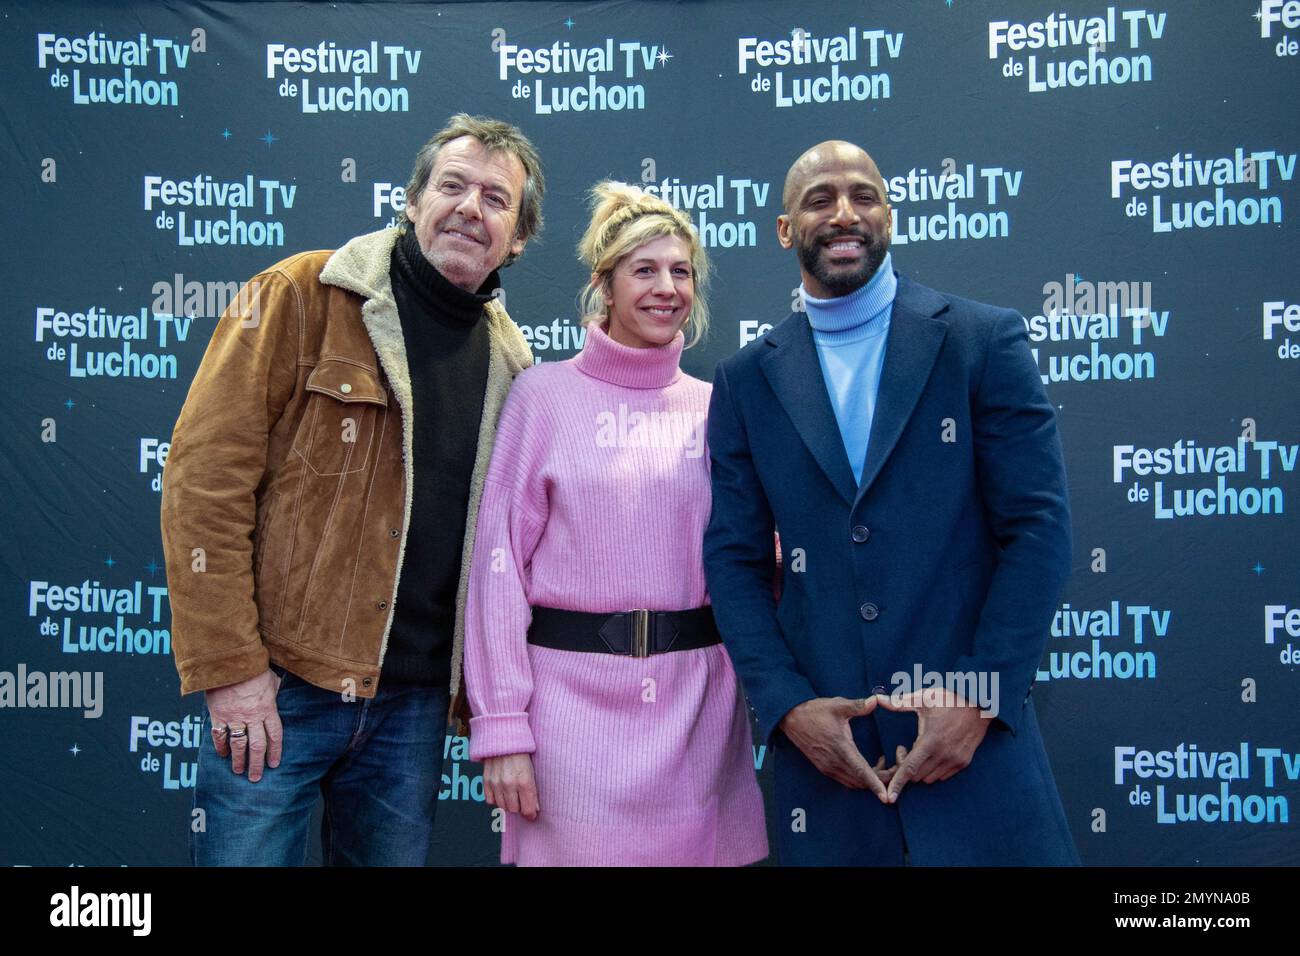 Jean Luc Reichmann, Juliette Tresanini and Stomy Bugsy attending the Leo  Mattei Photocall during the 25th Luchon TV Festival (Festival TV de Luchon)  in Luchon, France on February 04, 2023. Photo by